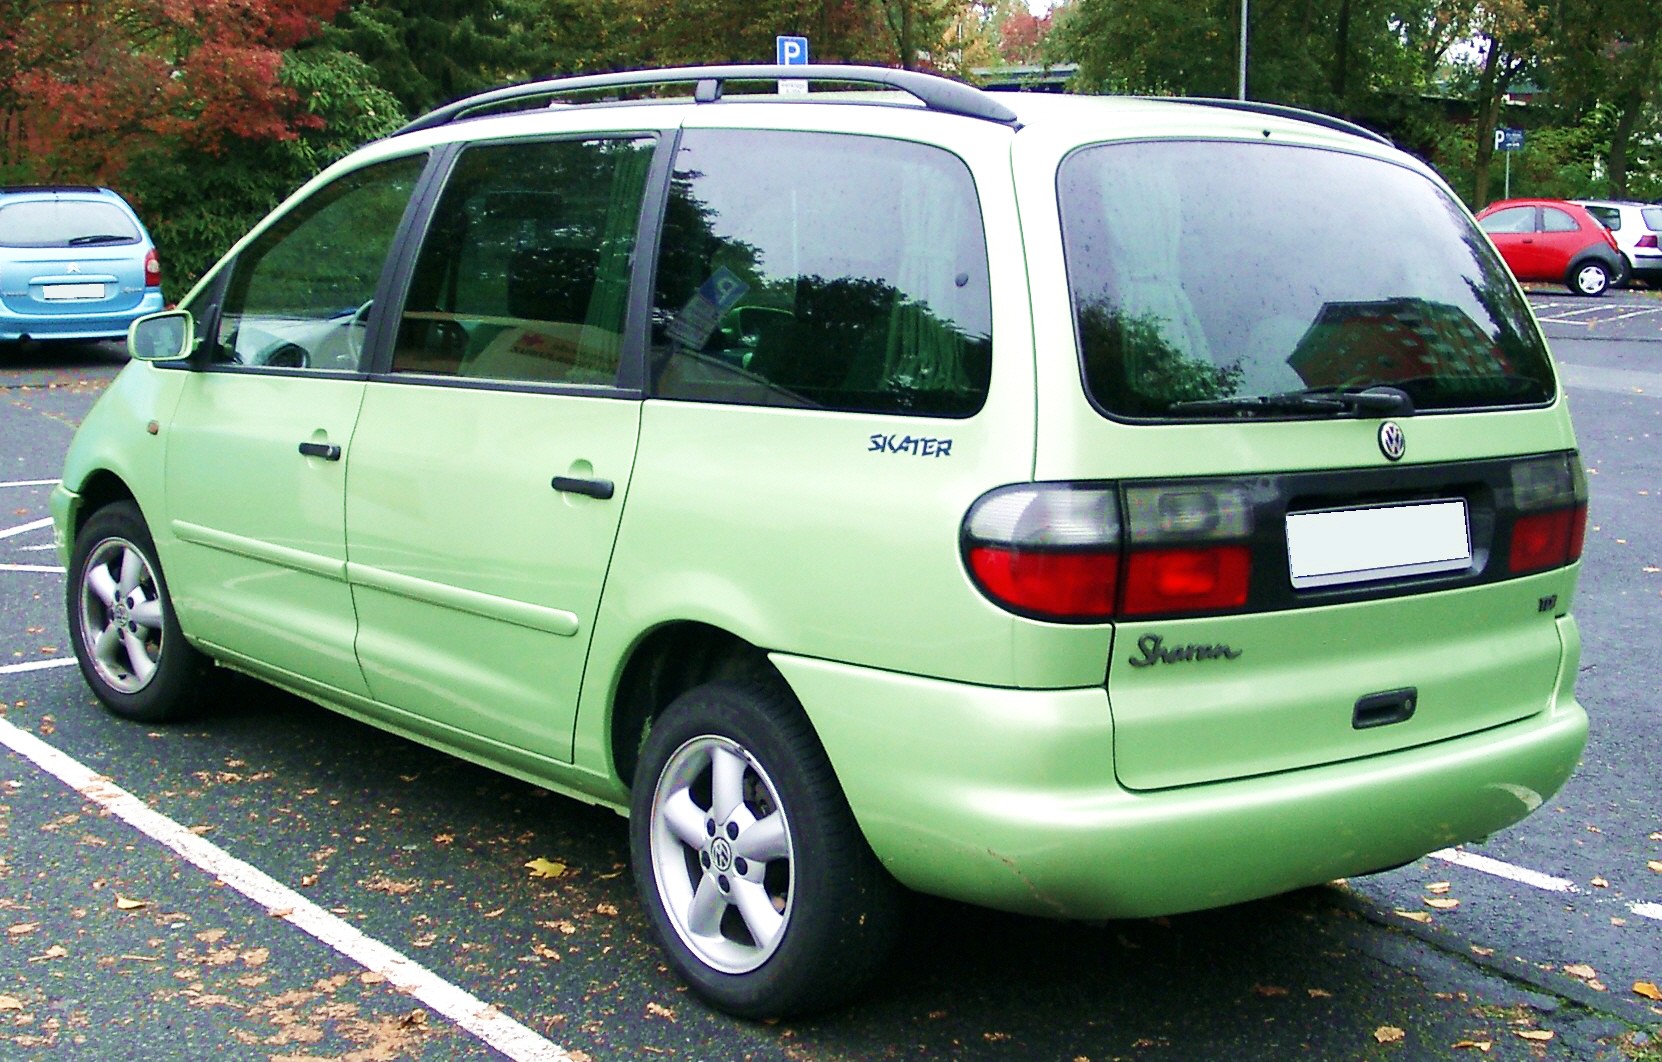 Volkswagen Sharan 1999 Review, Amazing Pictures and